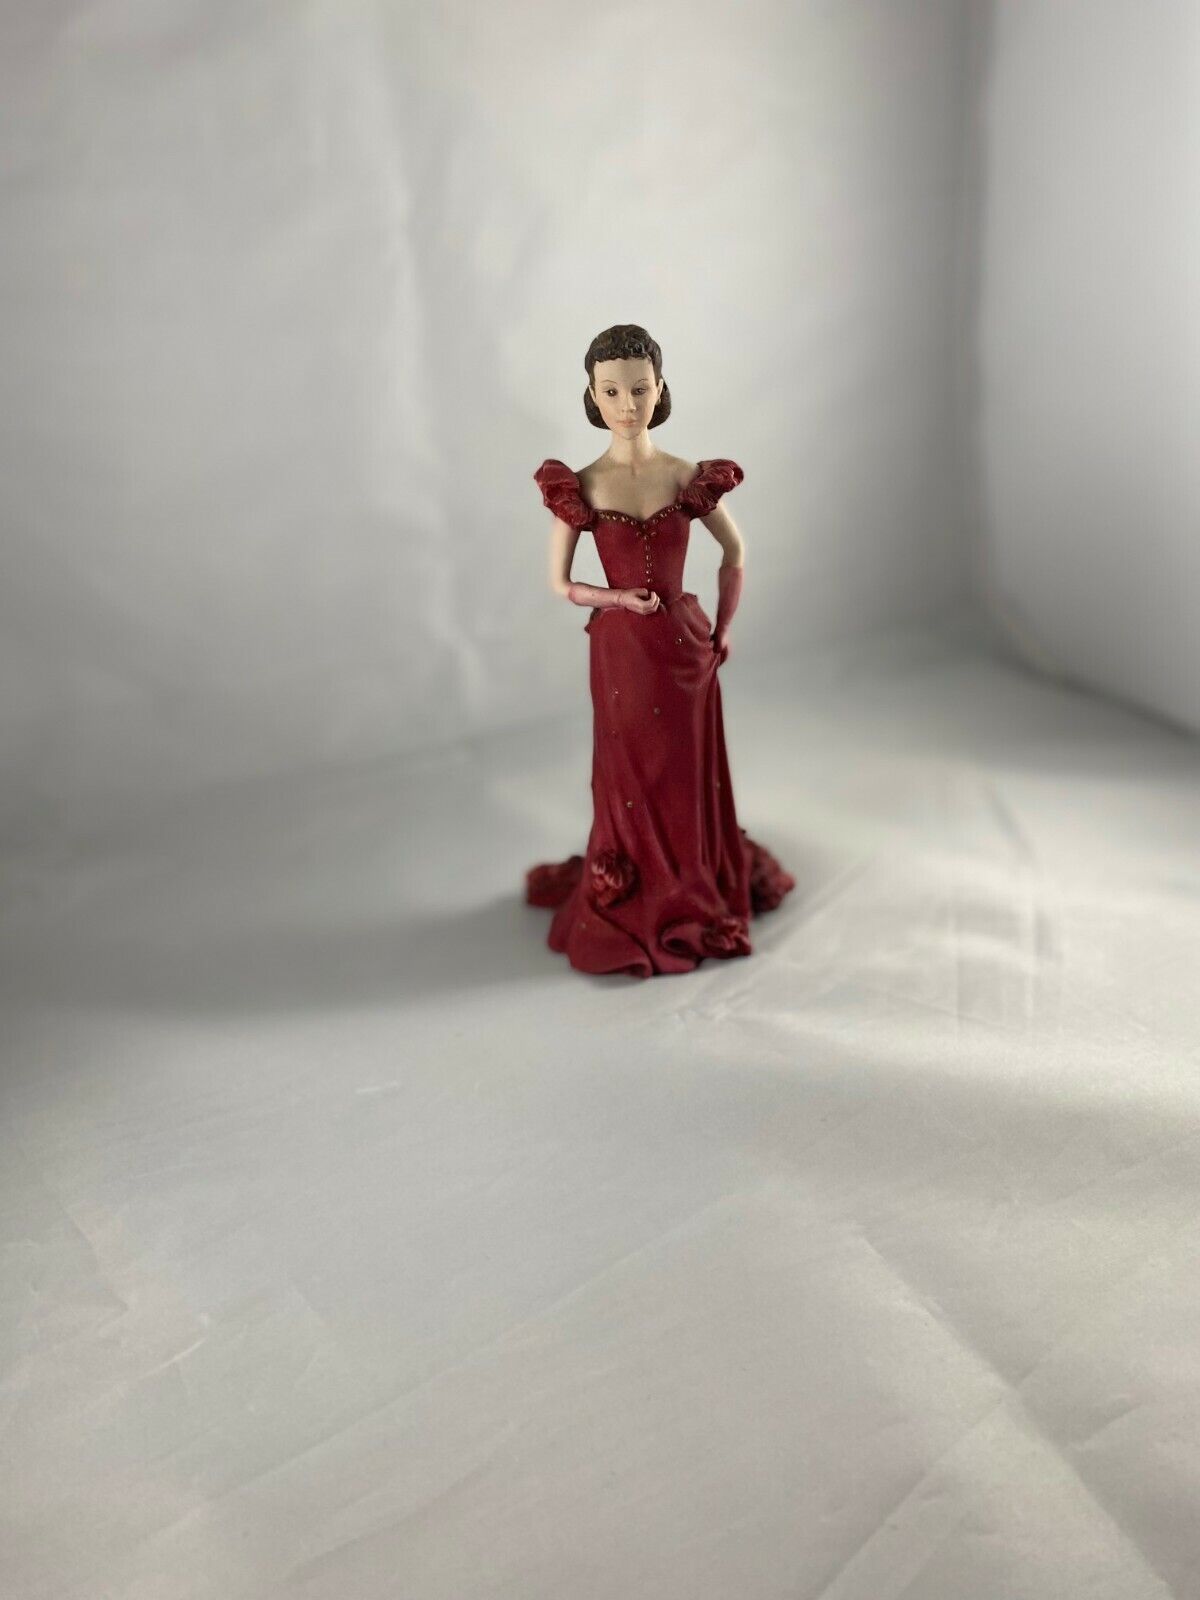 GONE WITH THE WIND DAVE GROSSMAN SCARLETT O\'HARA IN RED DRESS FIGURINE - RARE